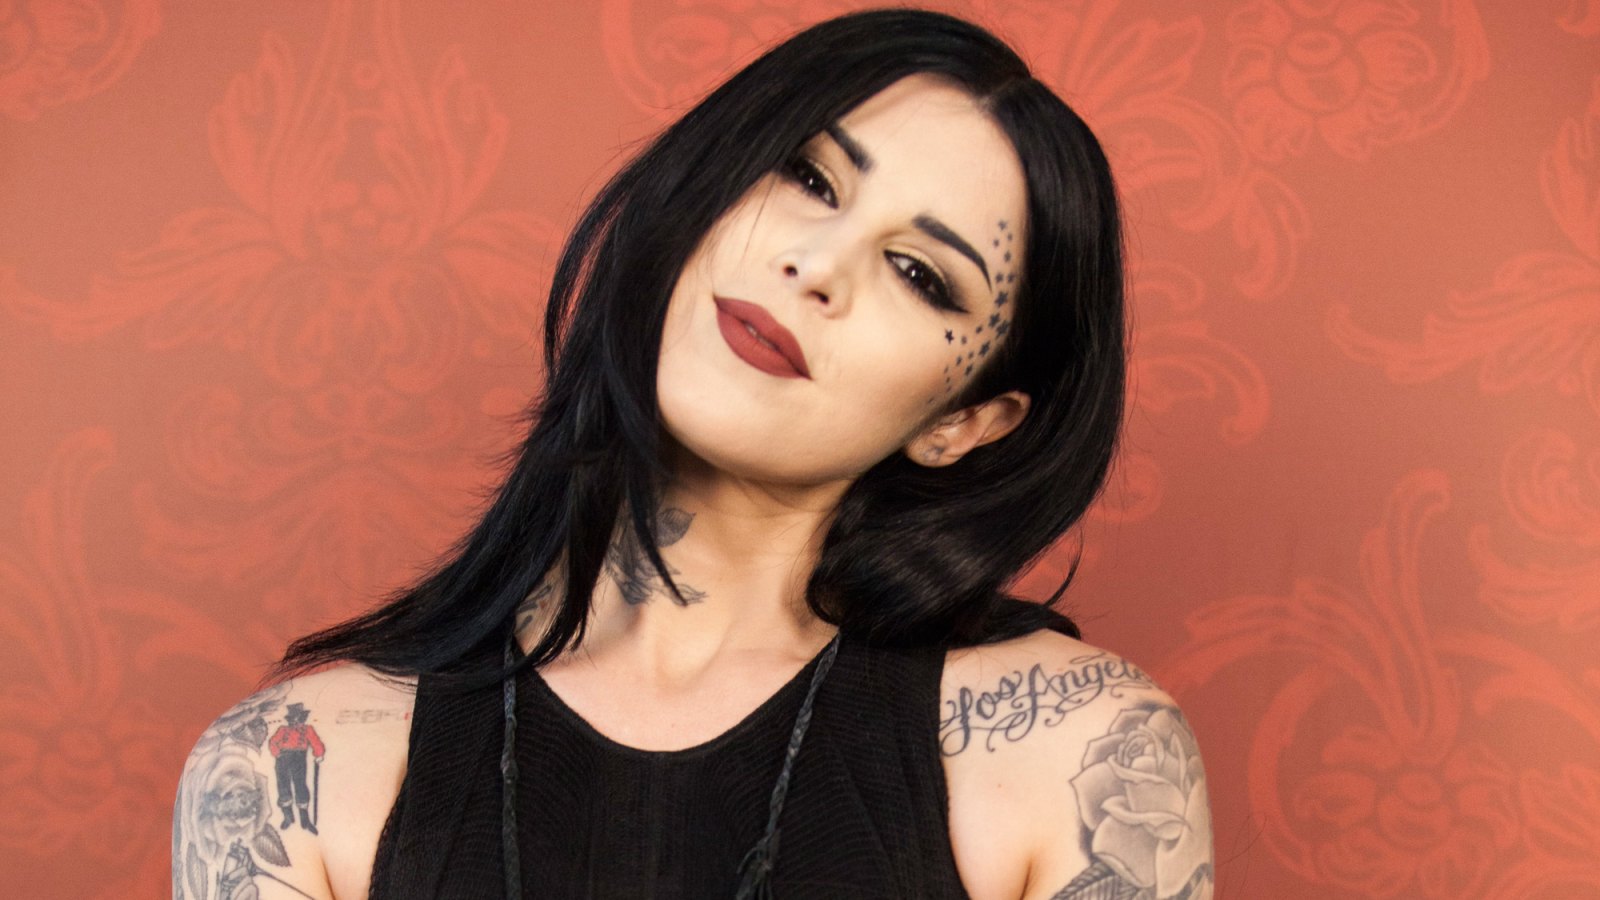 klamre sig Springboard Centimeter Kat Von D Is Pregnant, Expecting First Child With Leafar Seyer